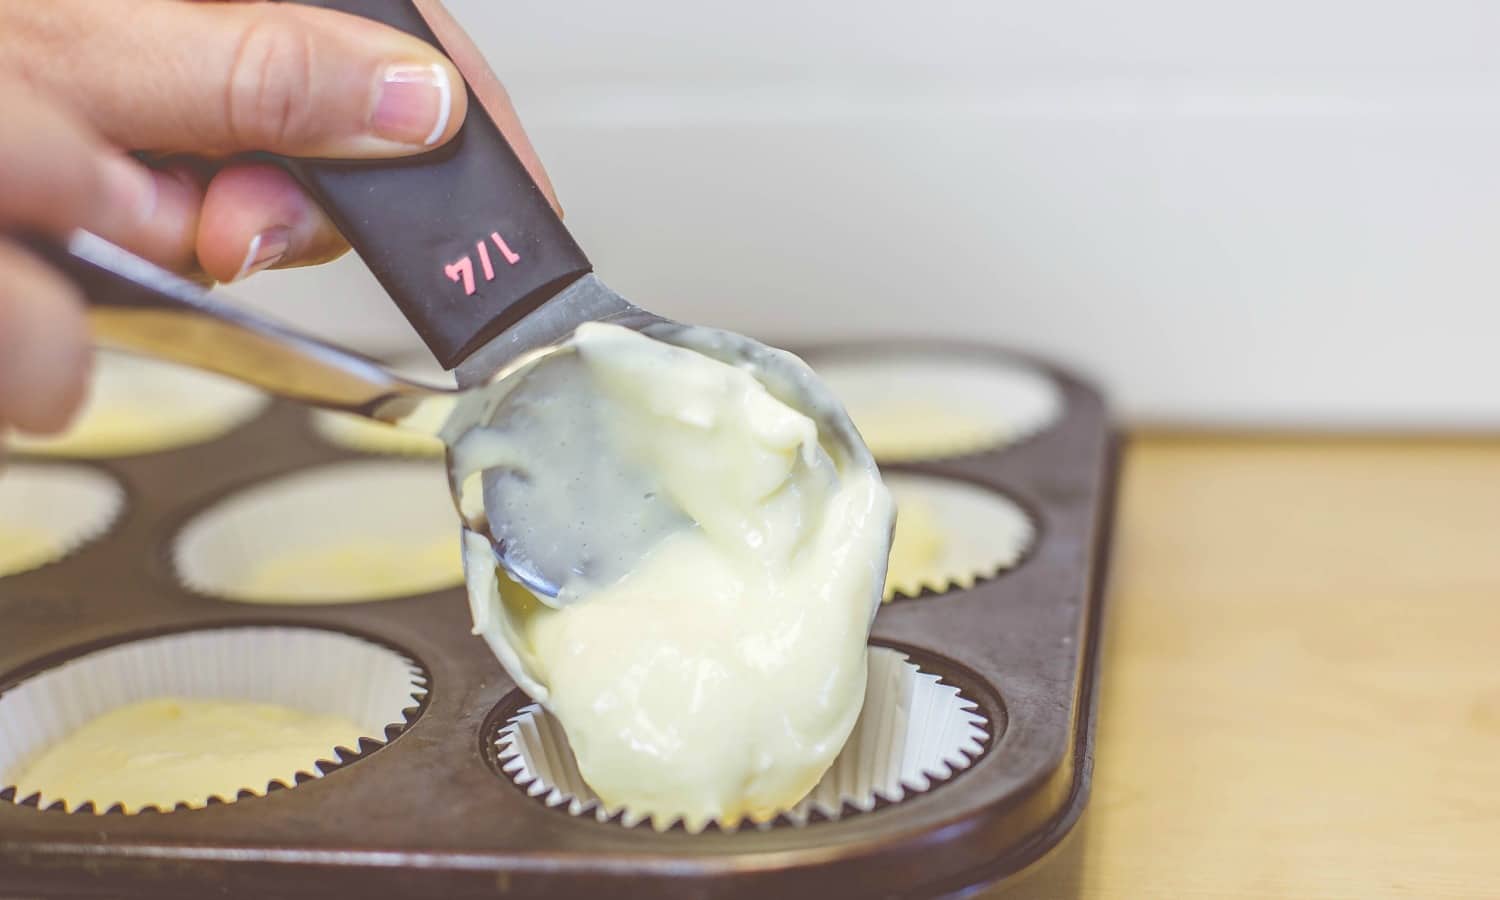 The next step for the easy Mini Cheesecakes is to spoon the creamy filling over the cookies.